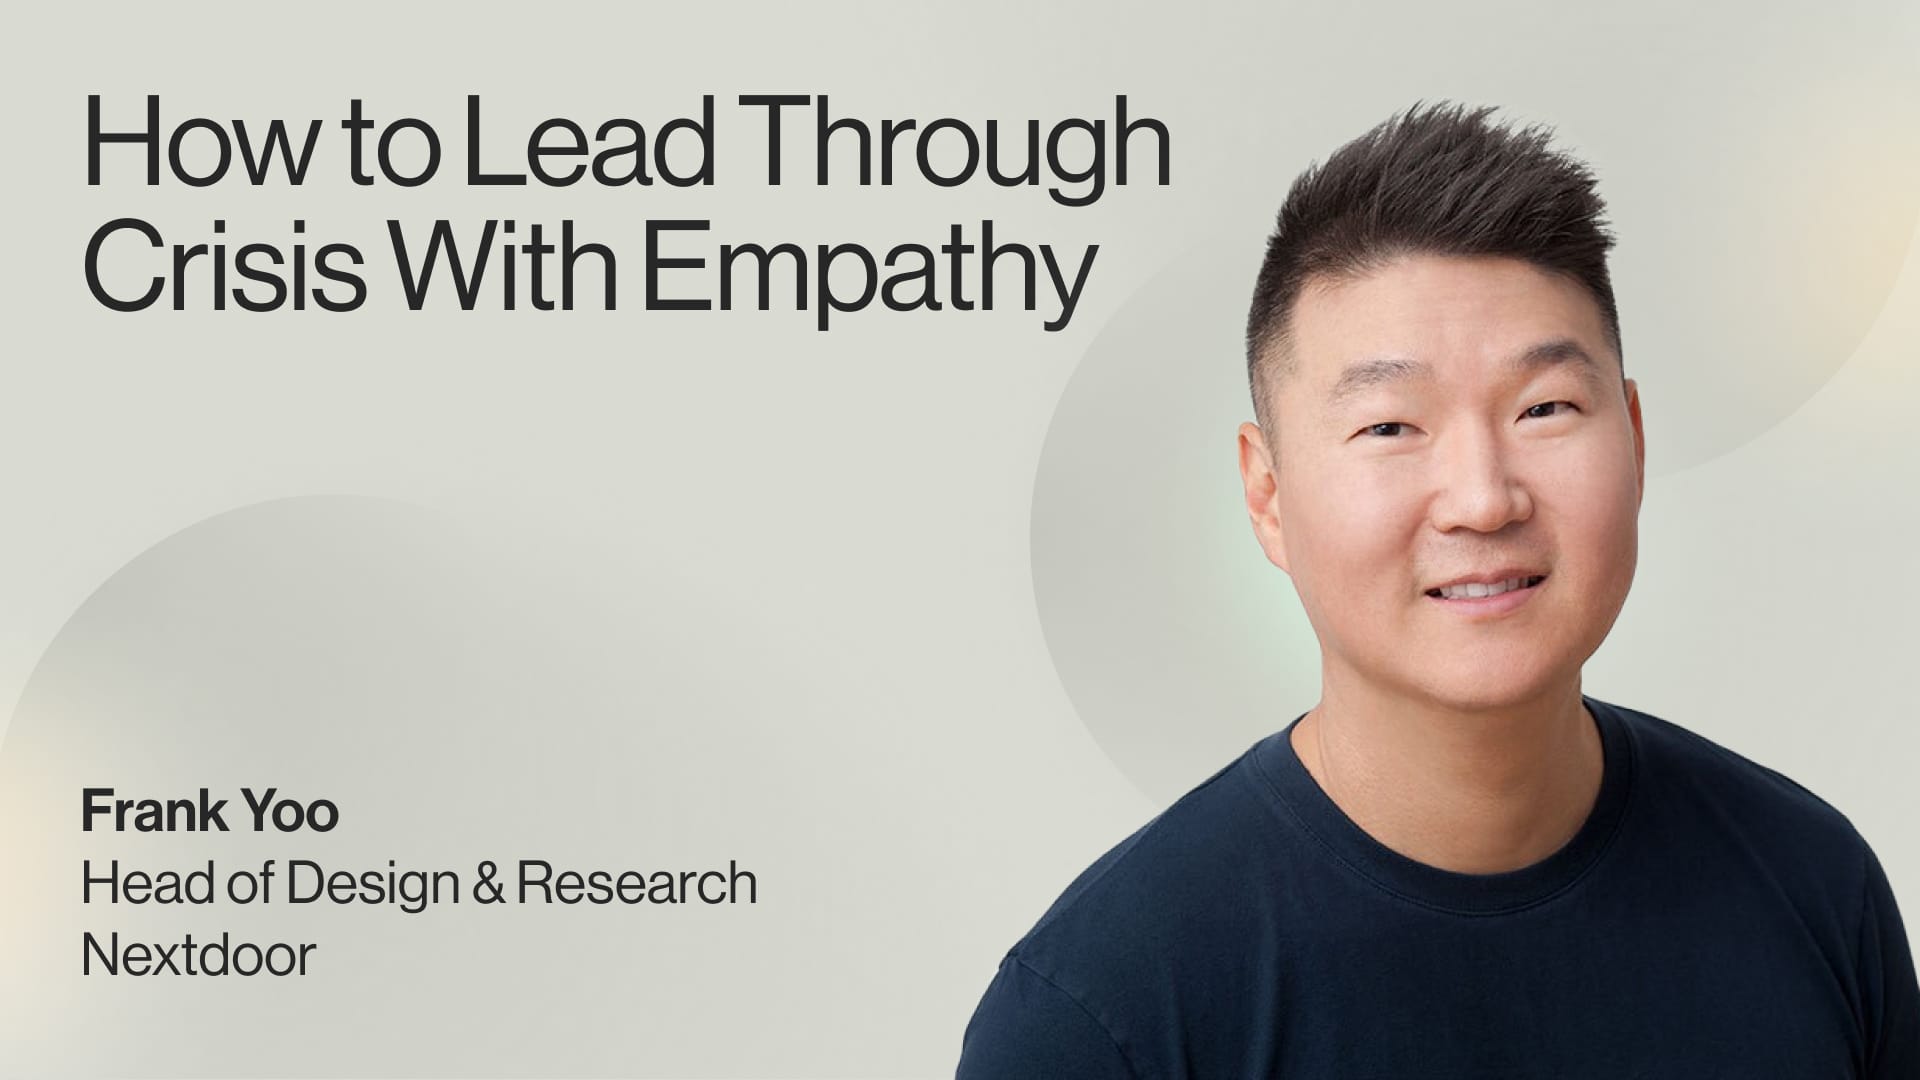 Podcast: How to Lead Through Crisis With Empathy — Frank Yoo, Head of Design & Research, Nextdoor